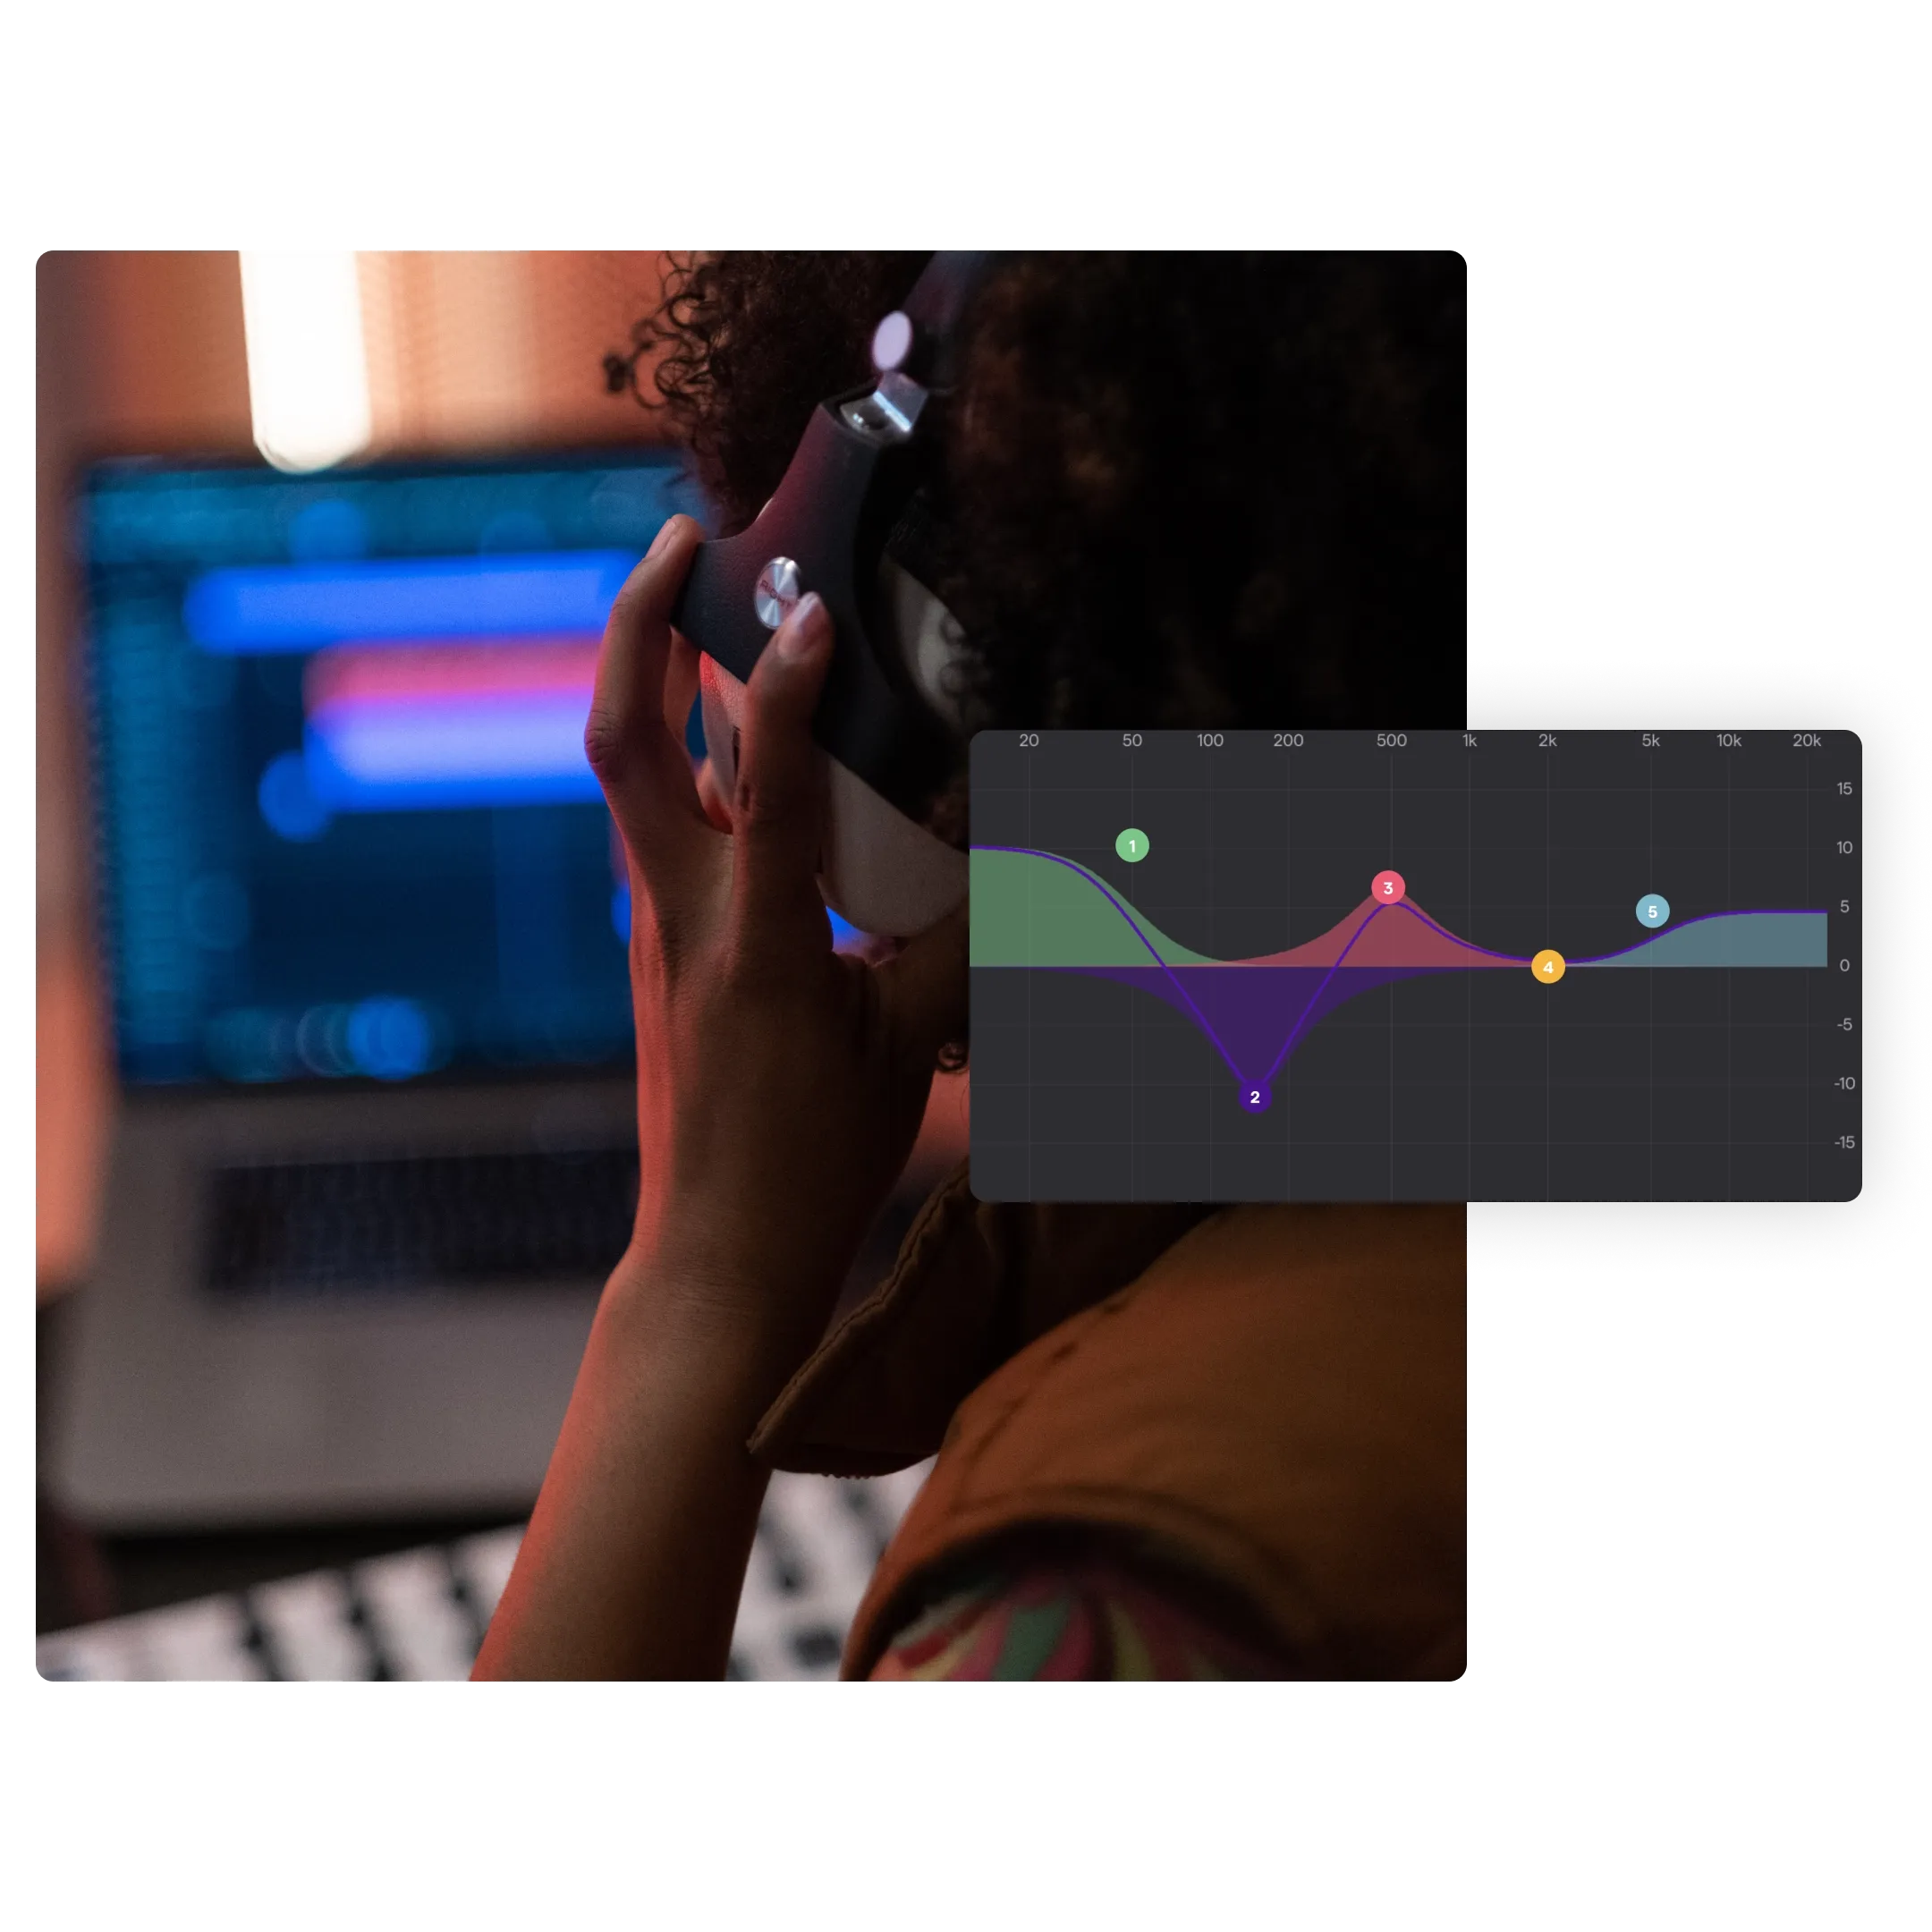 Two small square shaped pictures with one show a person sitting in front of a small home studio setup and the other one show another person play a midi keyboard connecting to a laptop